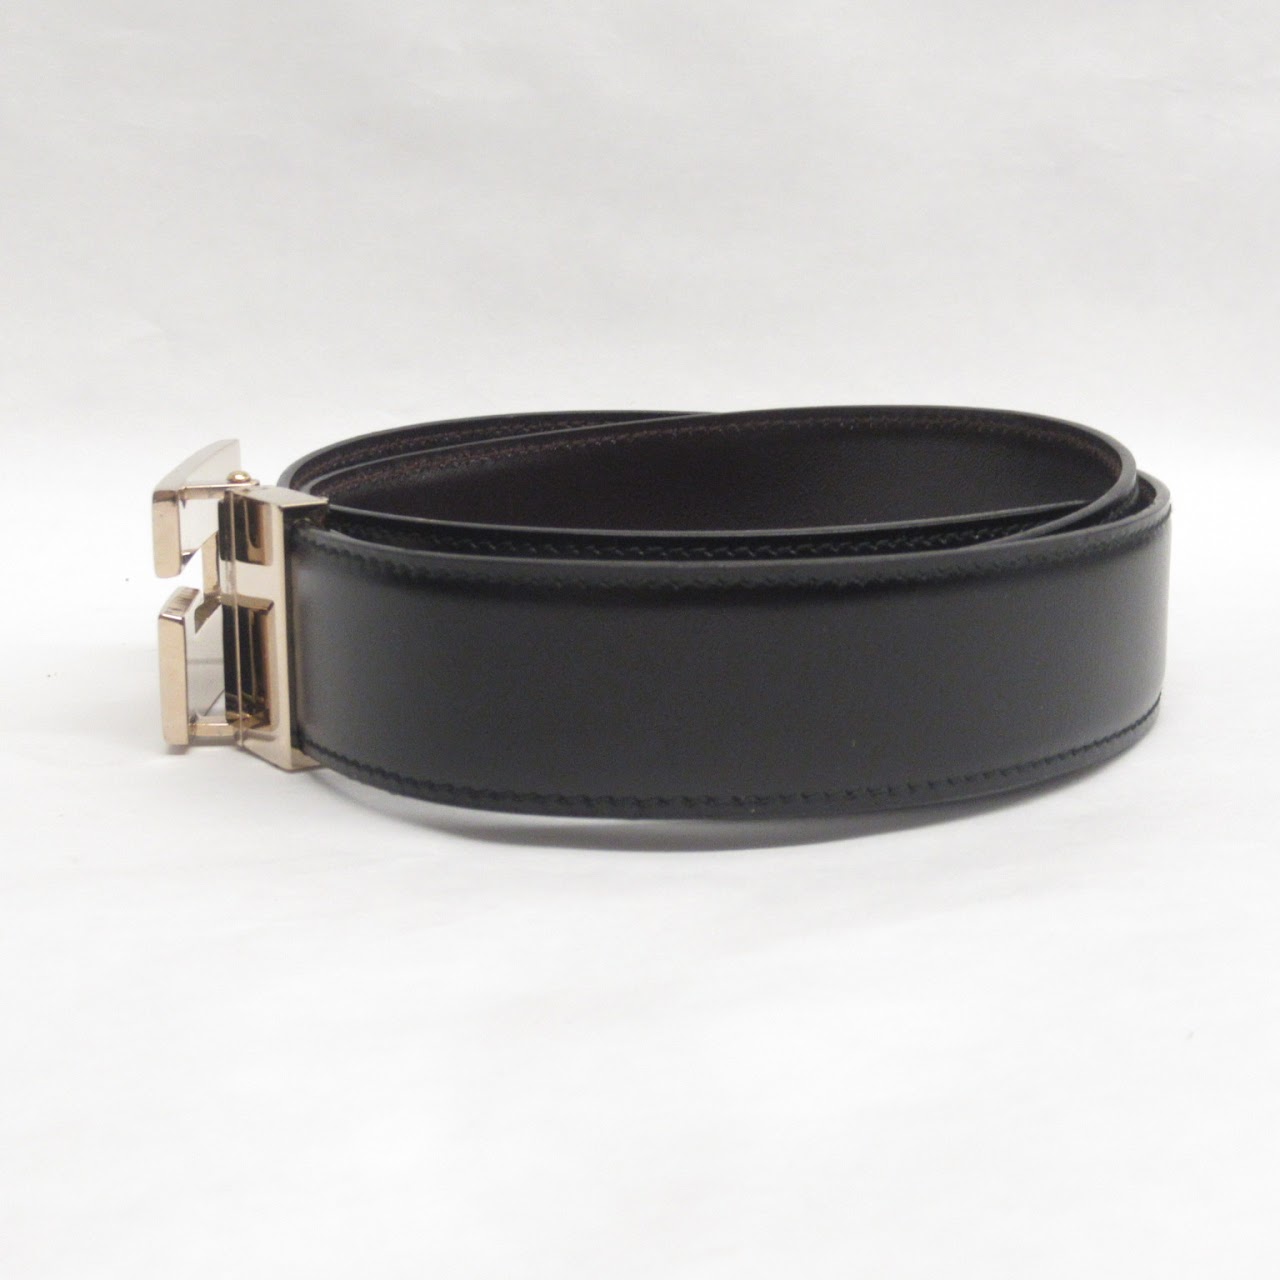 Gucci Reversible Leather Belt